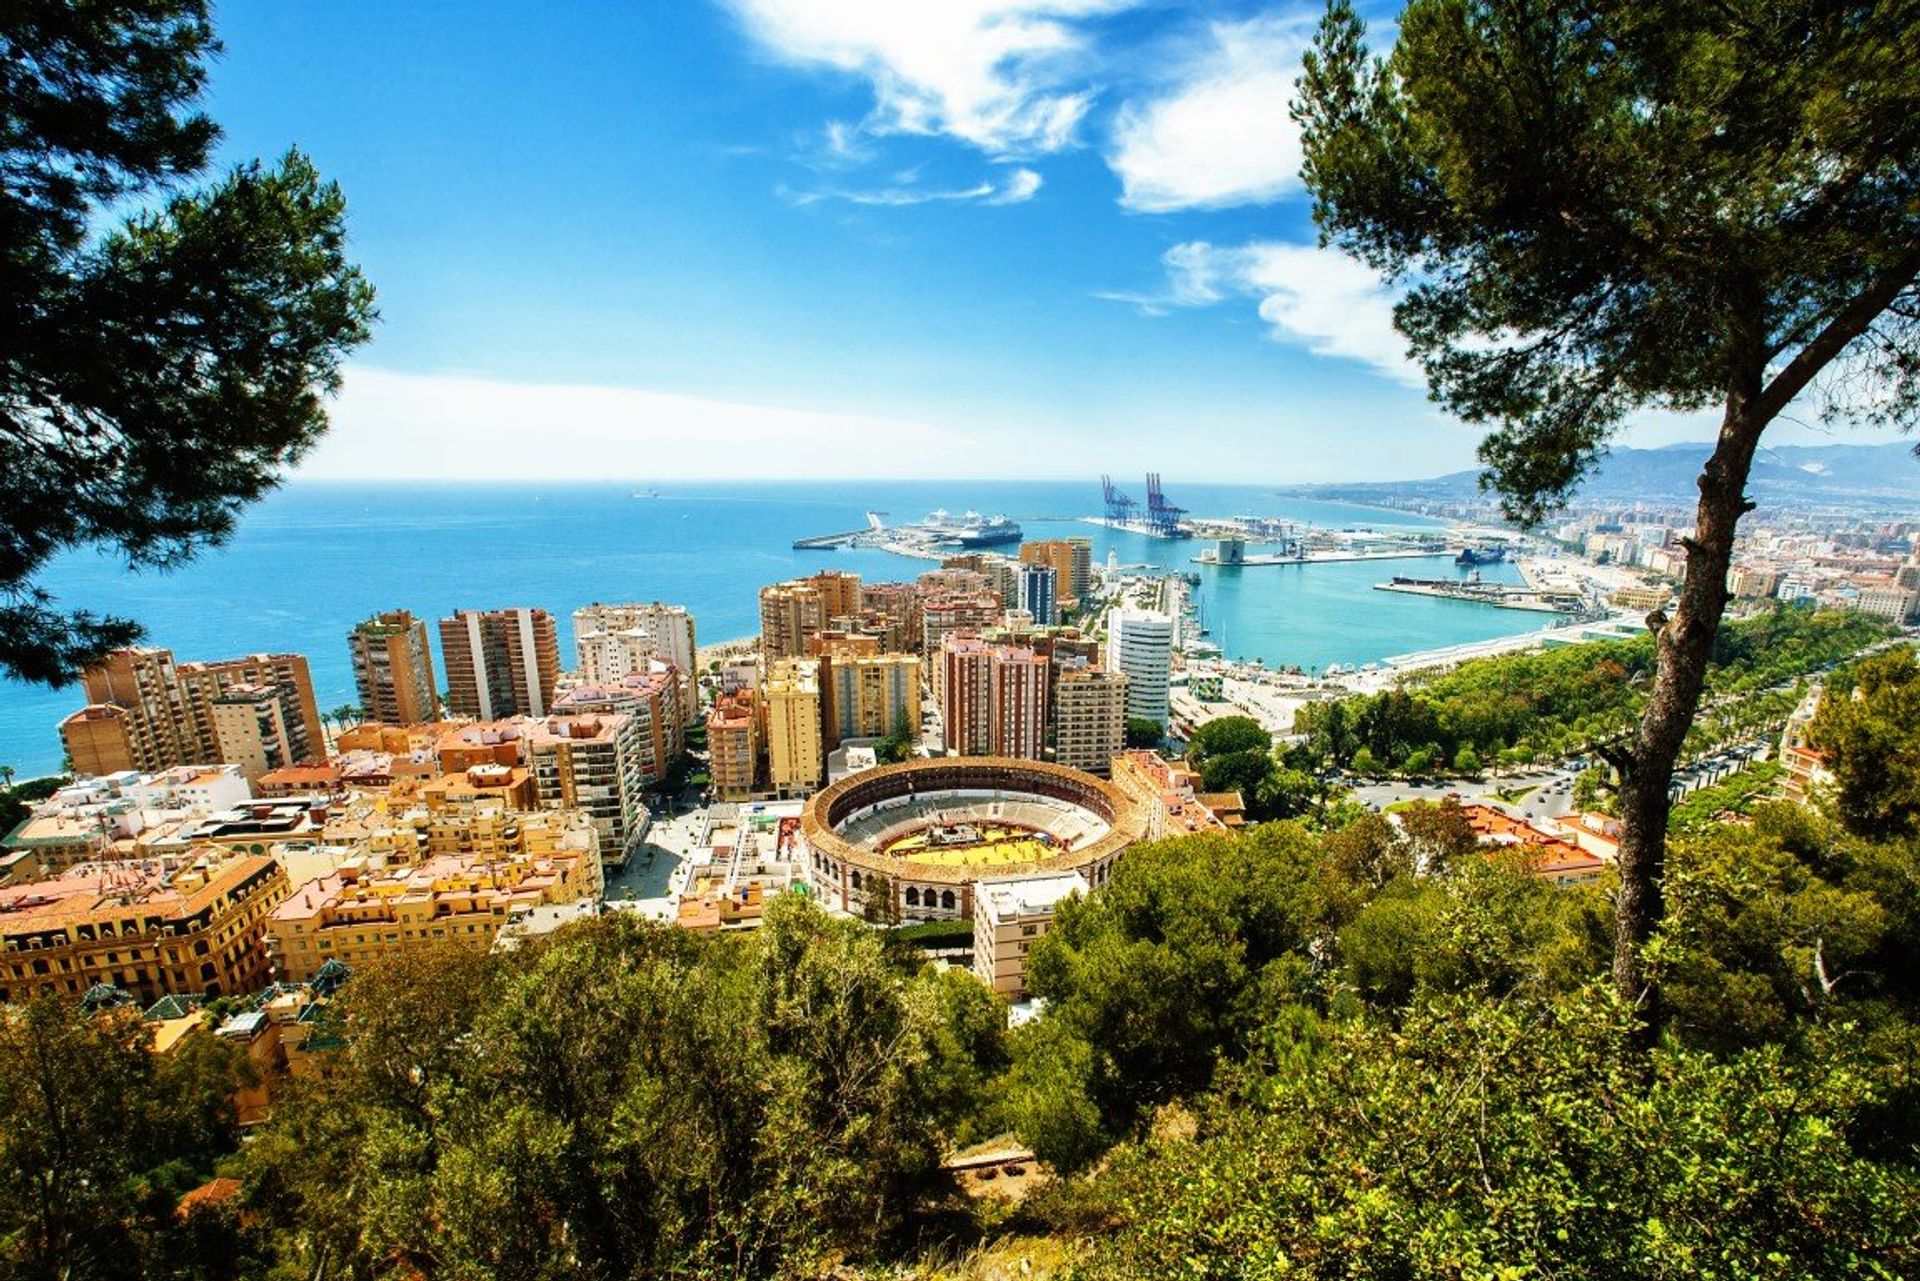 Take a day trip to vibrant Malaga city, just under a 40 minute drive from Los Boliches via the A7 motorway